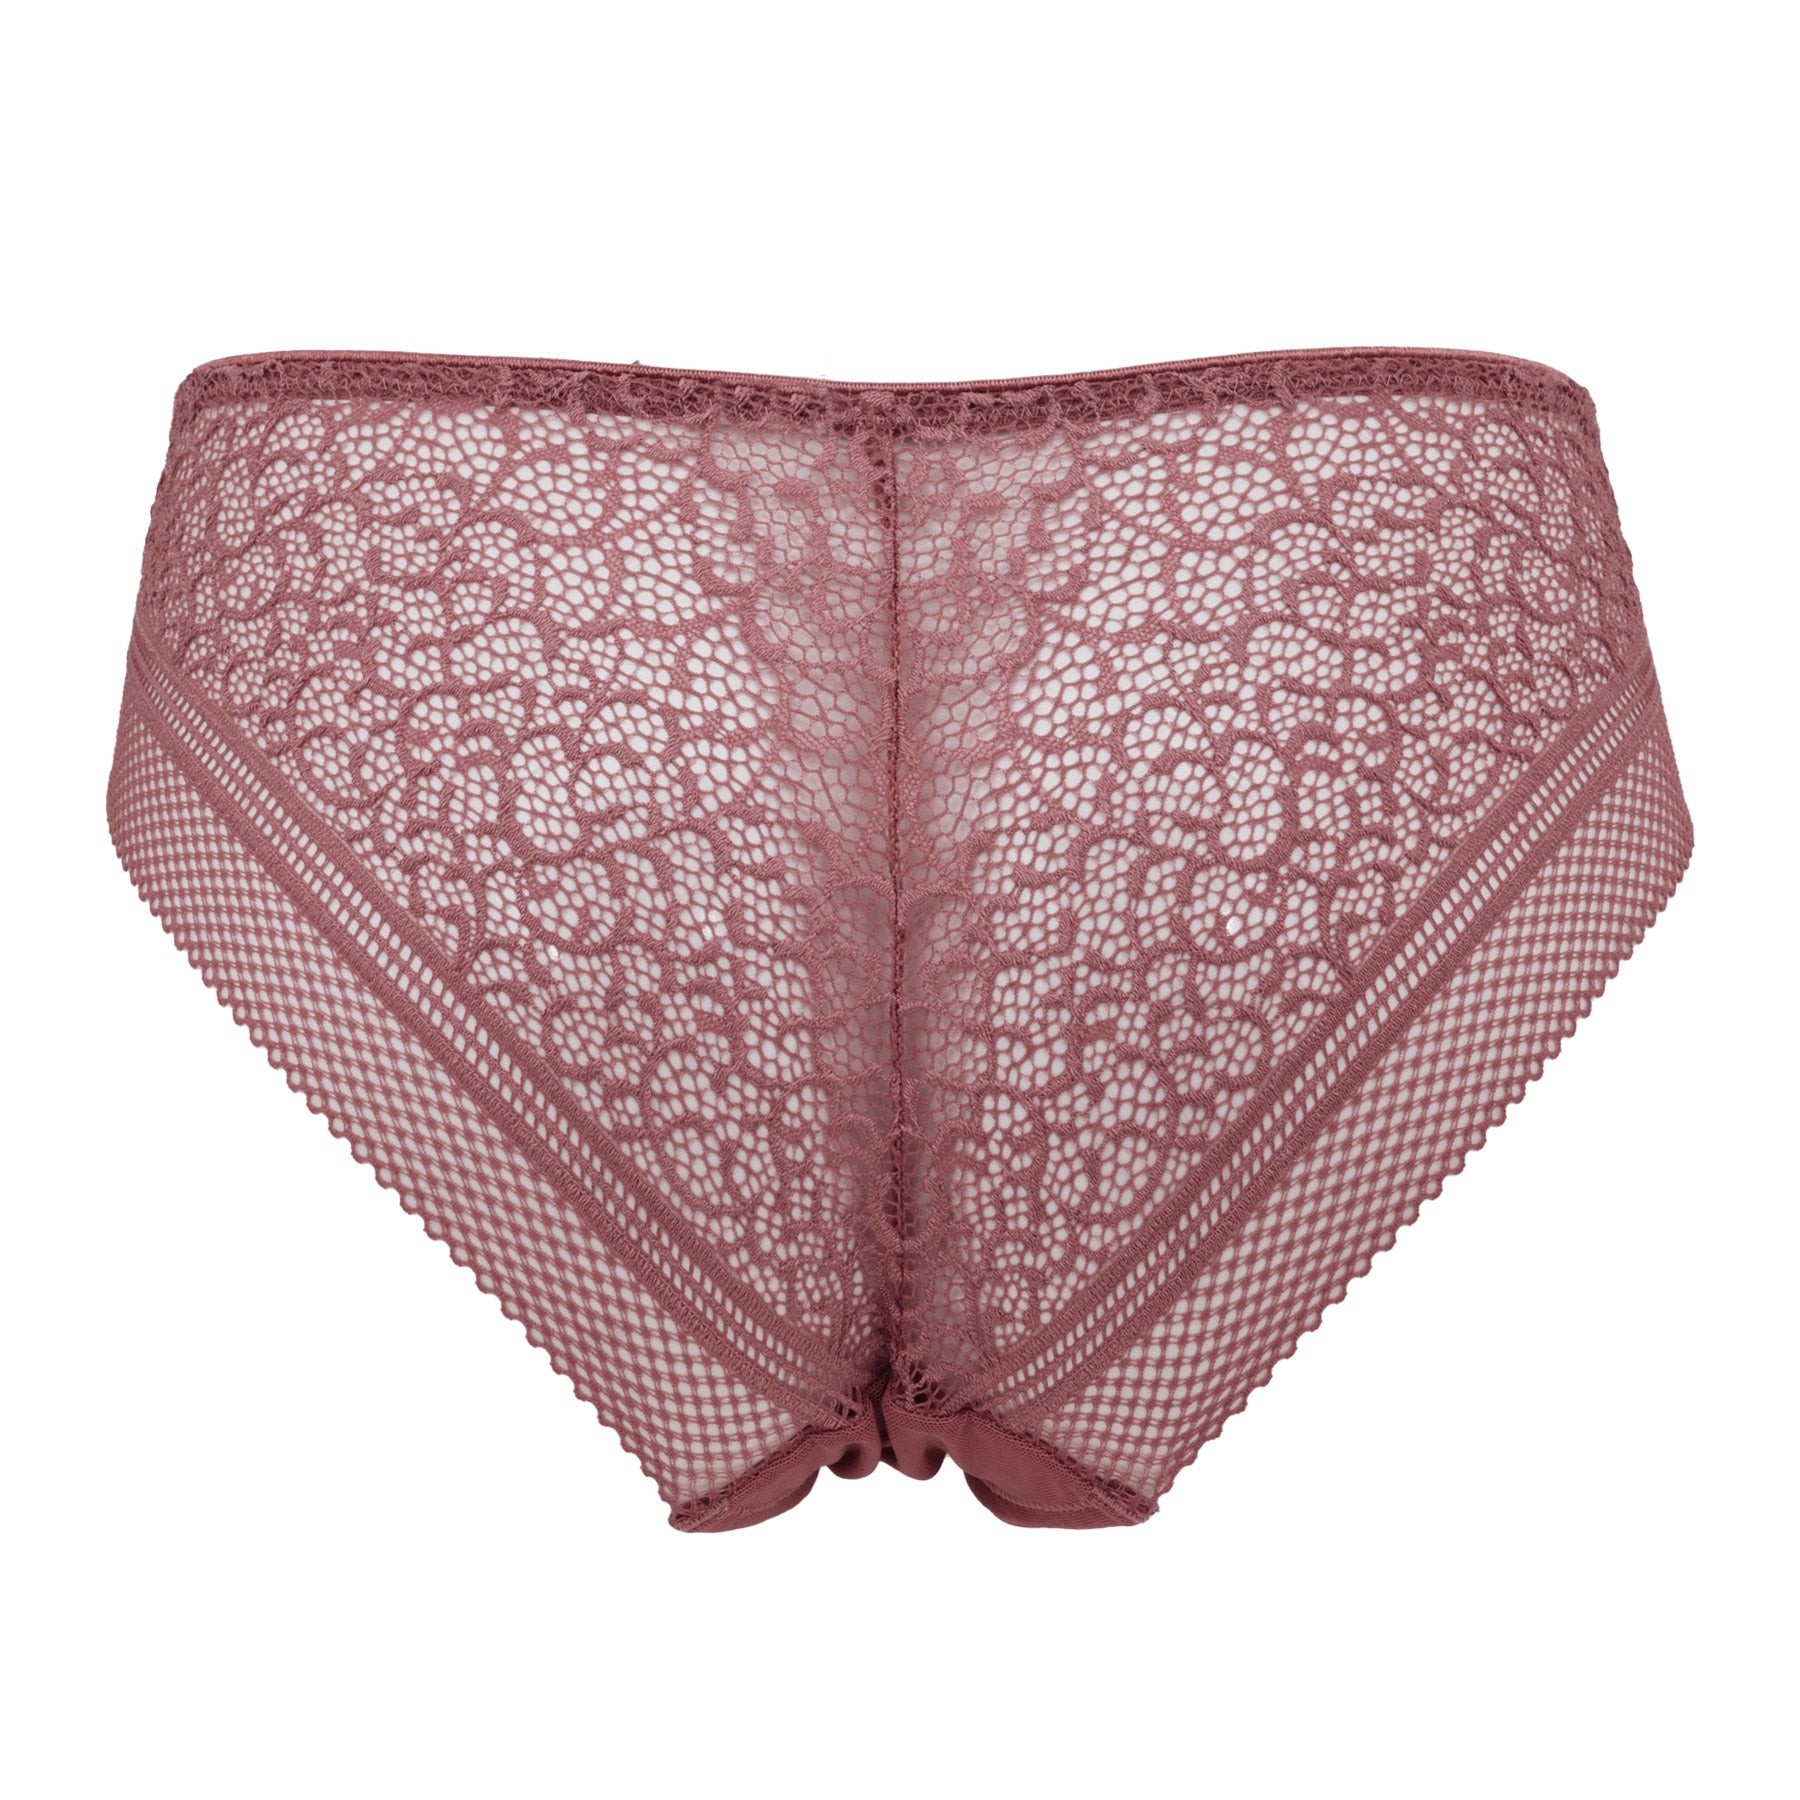 Heart Cup Panty 21A2